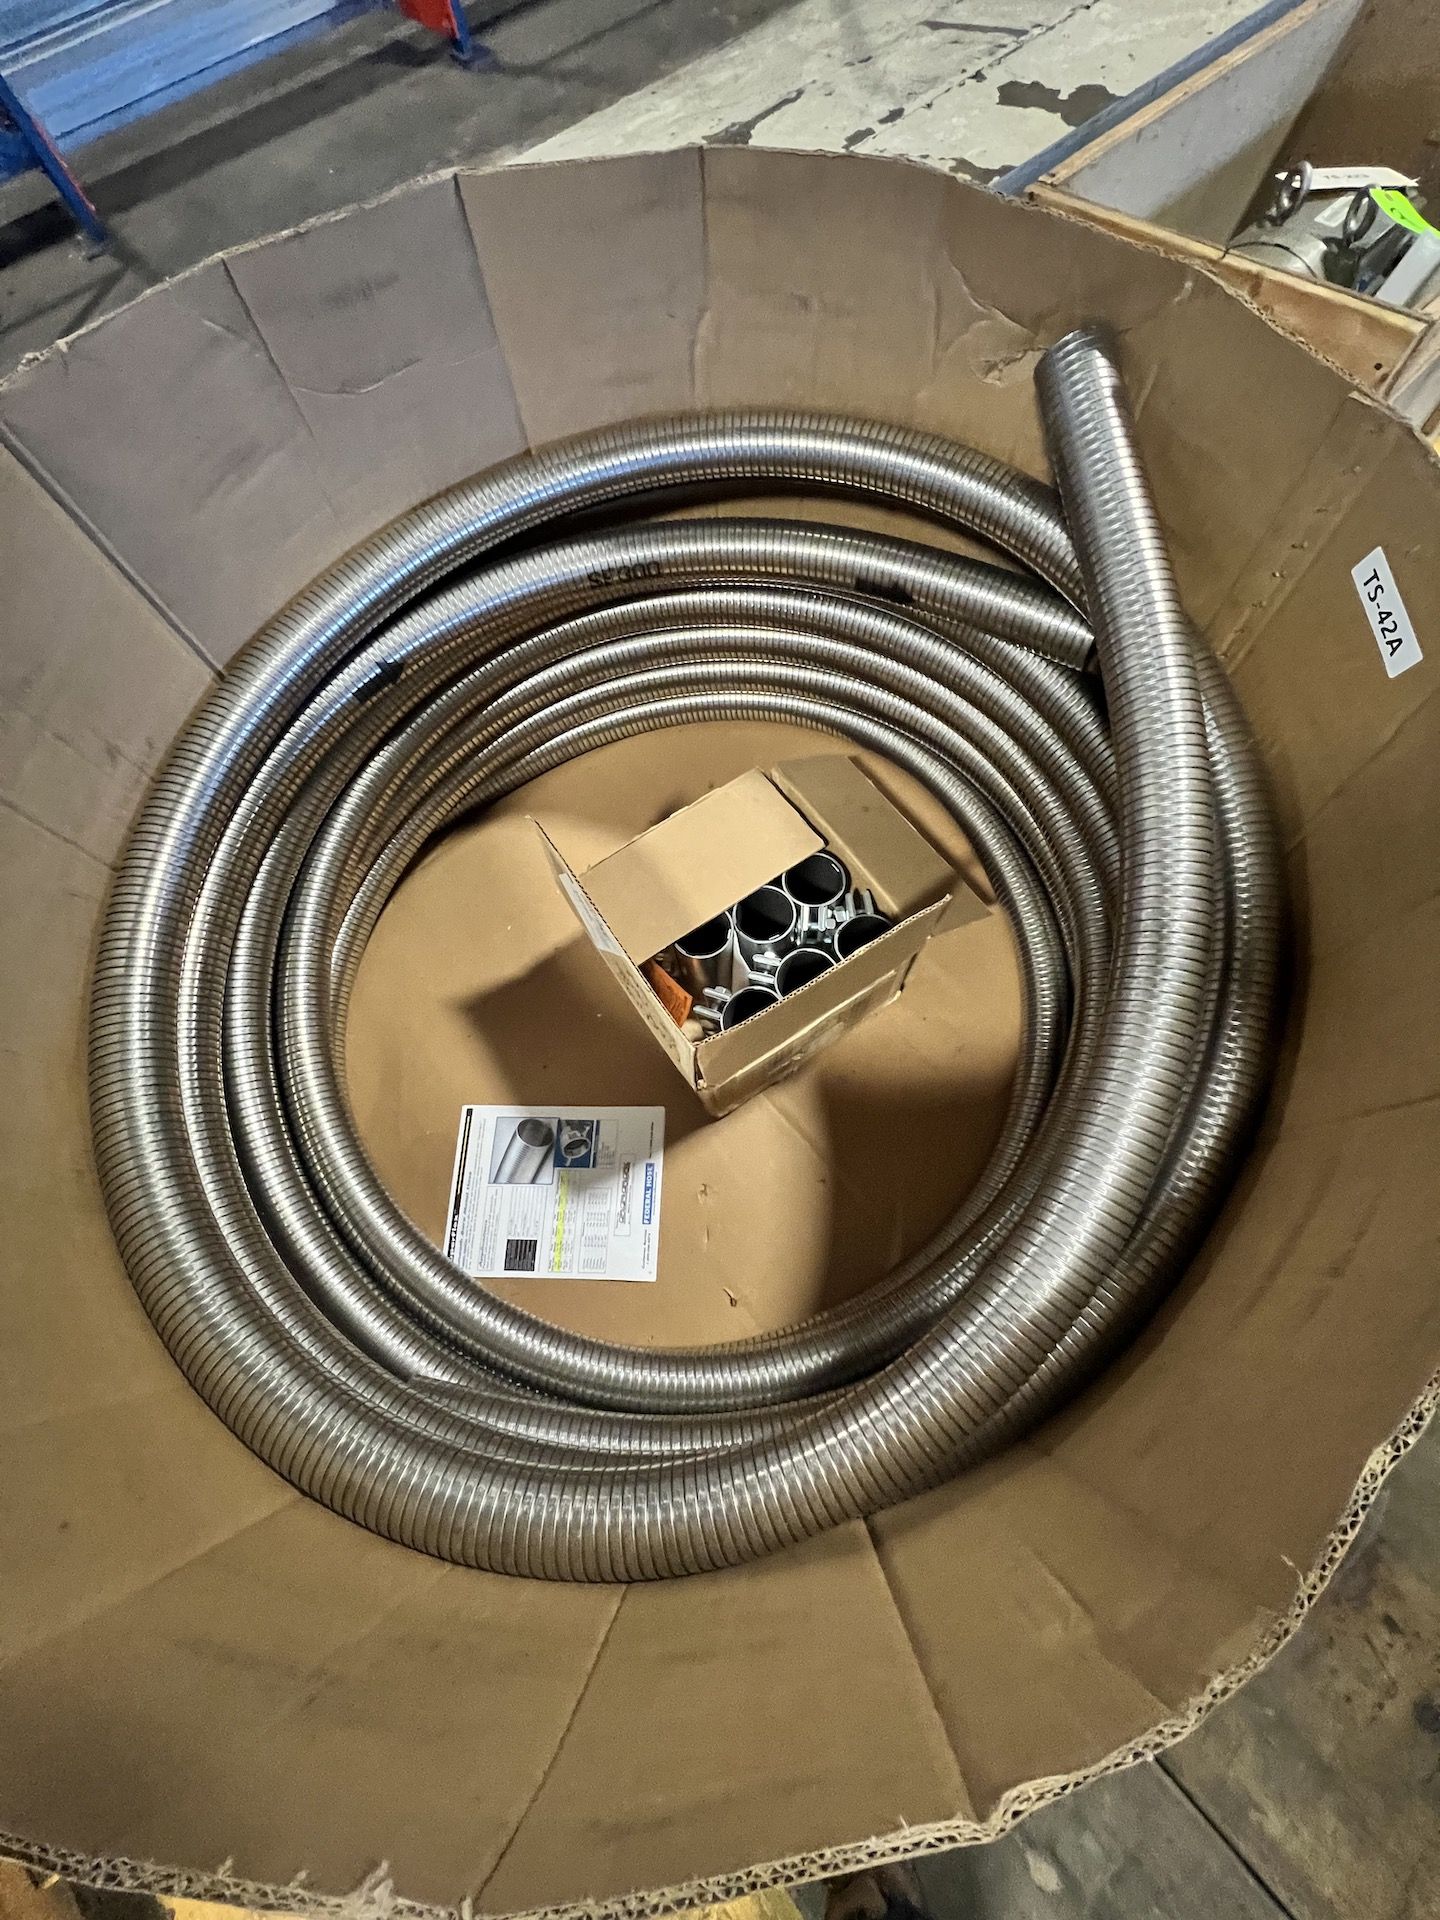 (2) Federal Super Flex, Smooth Bore, Light Duty Stainless Steel Hose # SF-300, 2 1/2" x 50' Long - Image 8 of 8